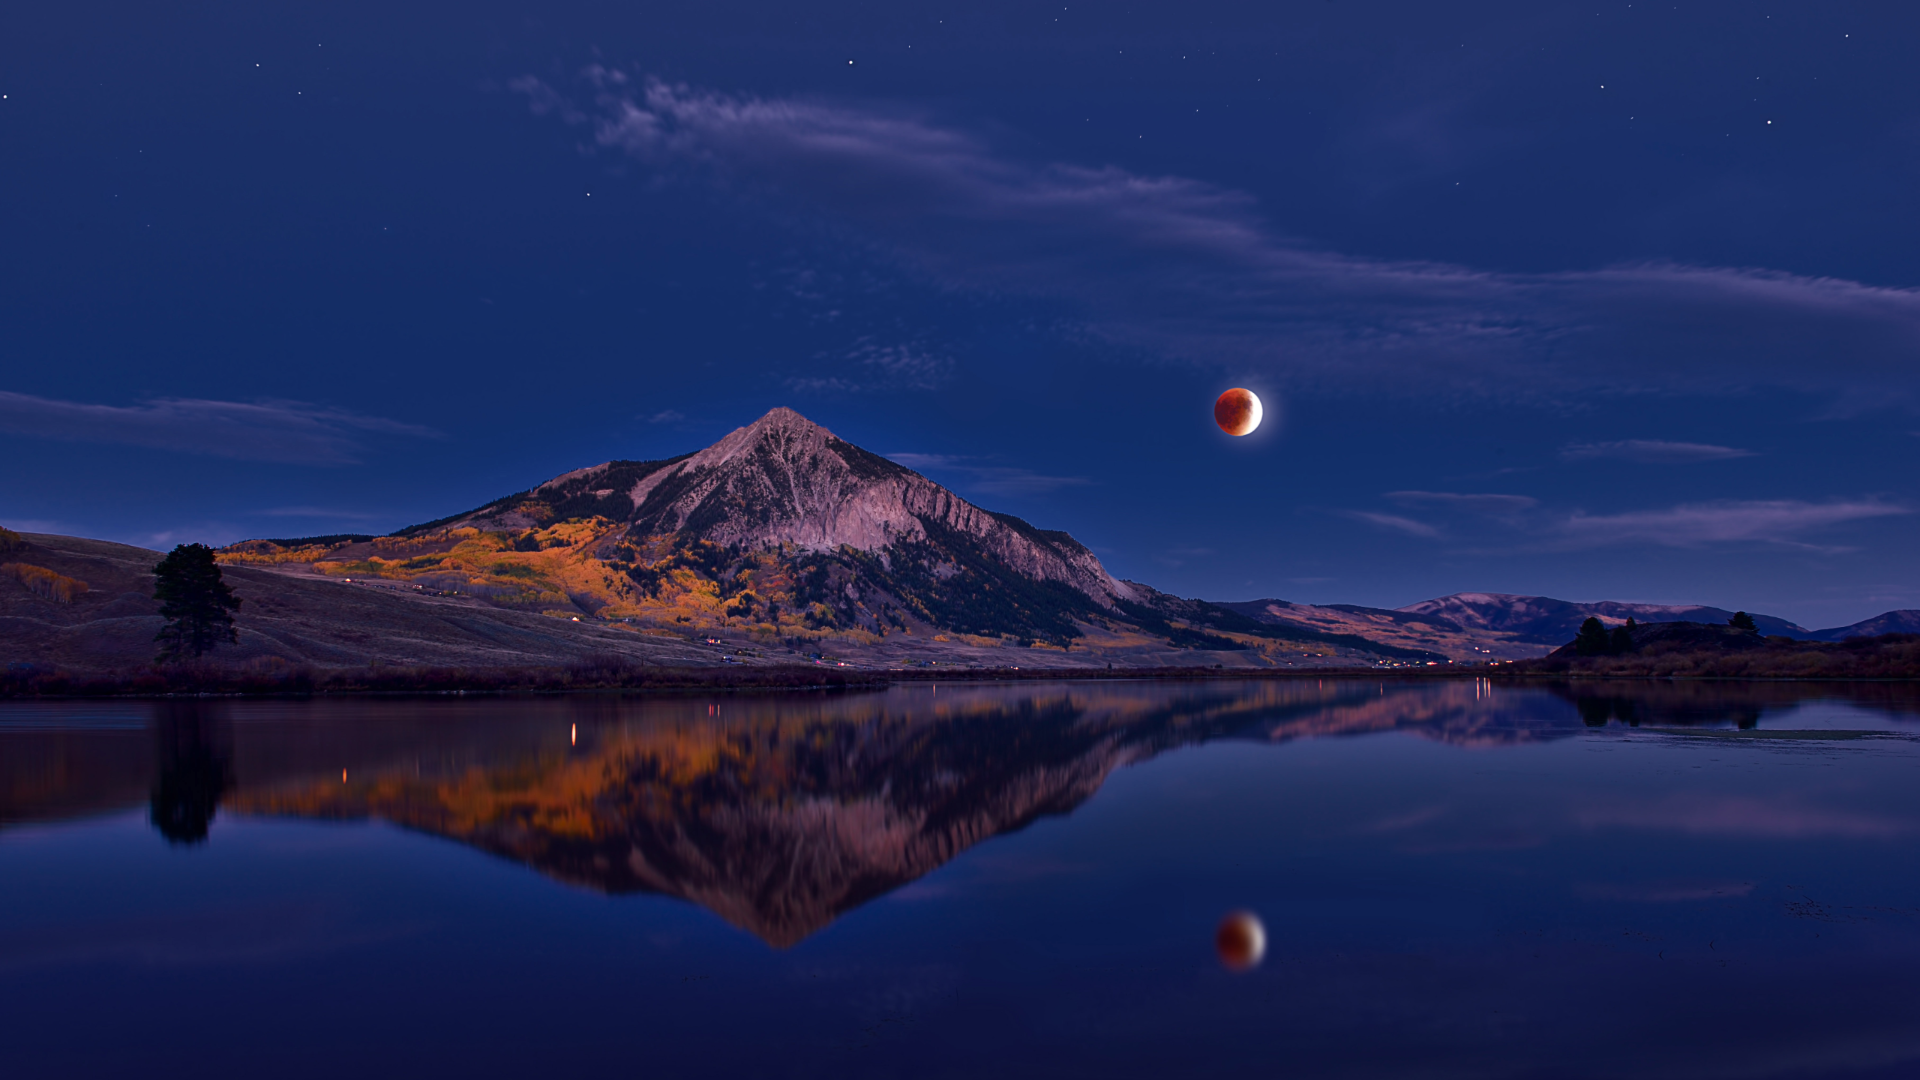 Nature Landscape Mountains Sky Clouds Lake Water Moon Red Moon Trees Stars Reflection Lunar Eclipse  1920x1080